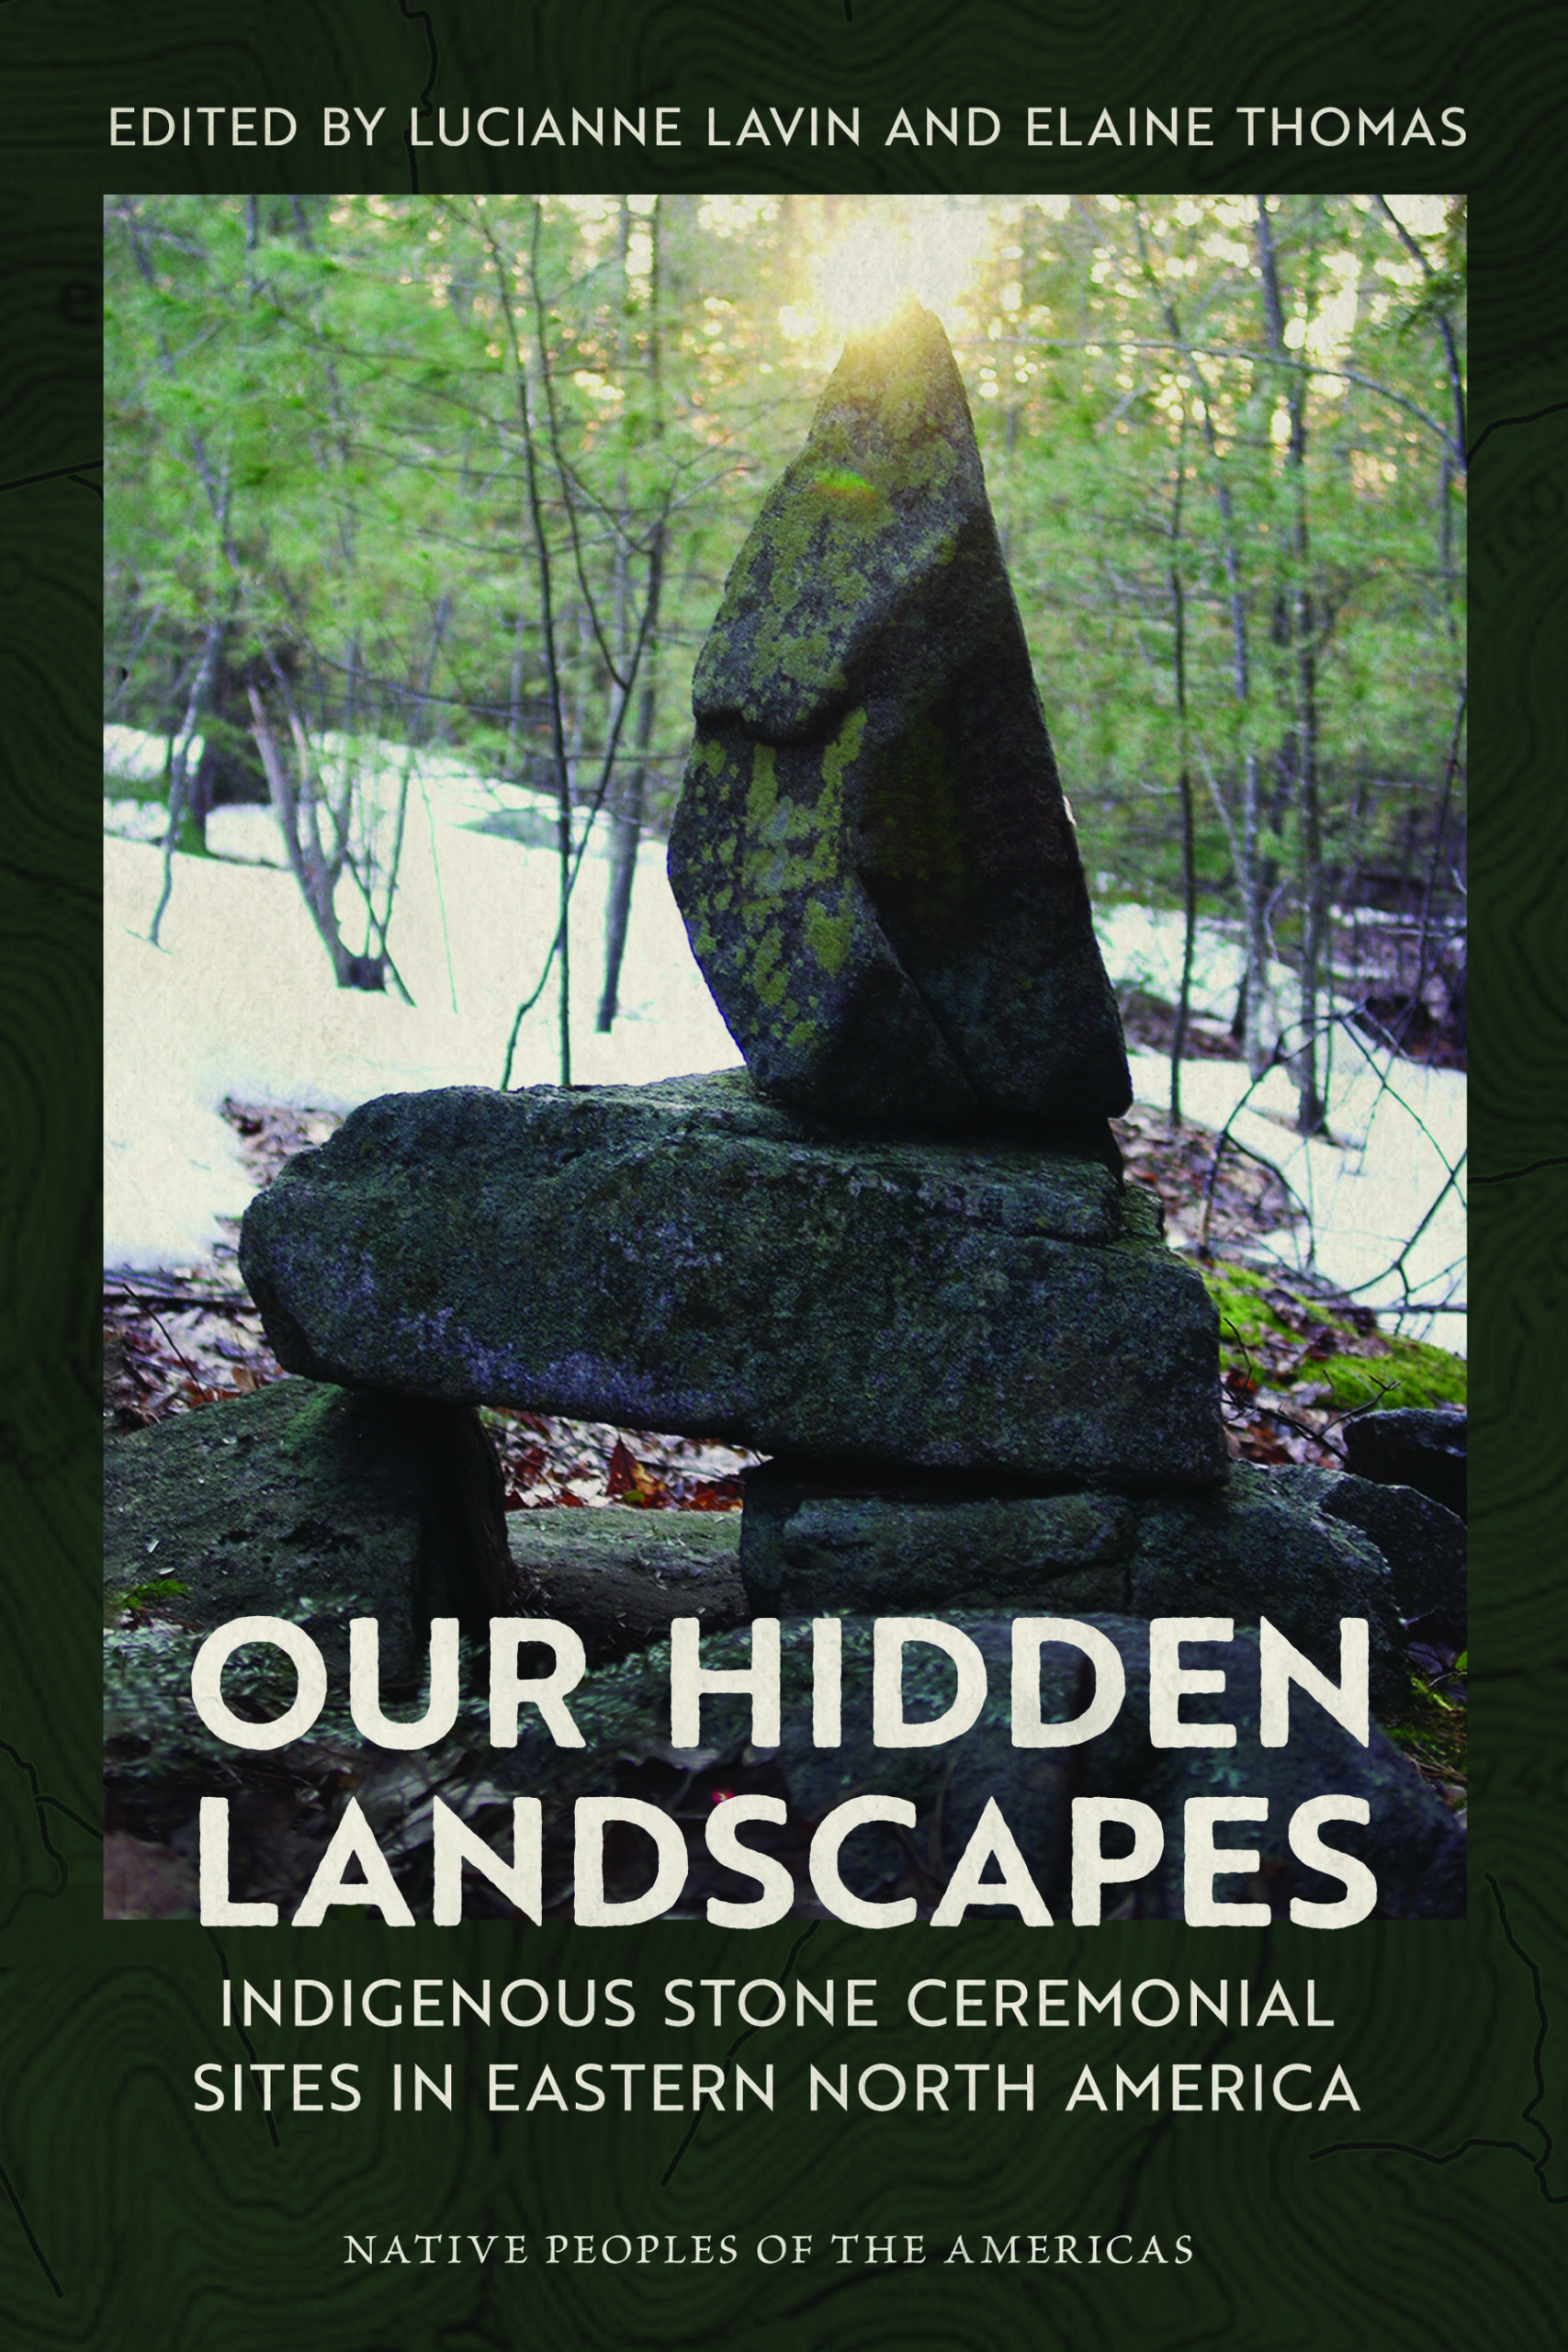 Cover Art for "Our Hidden Landscapes" by Lucianne Lavin